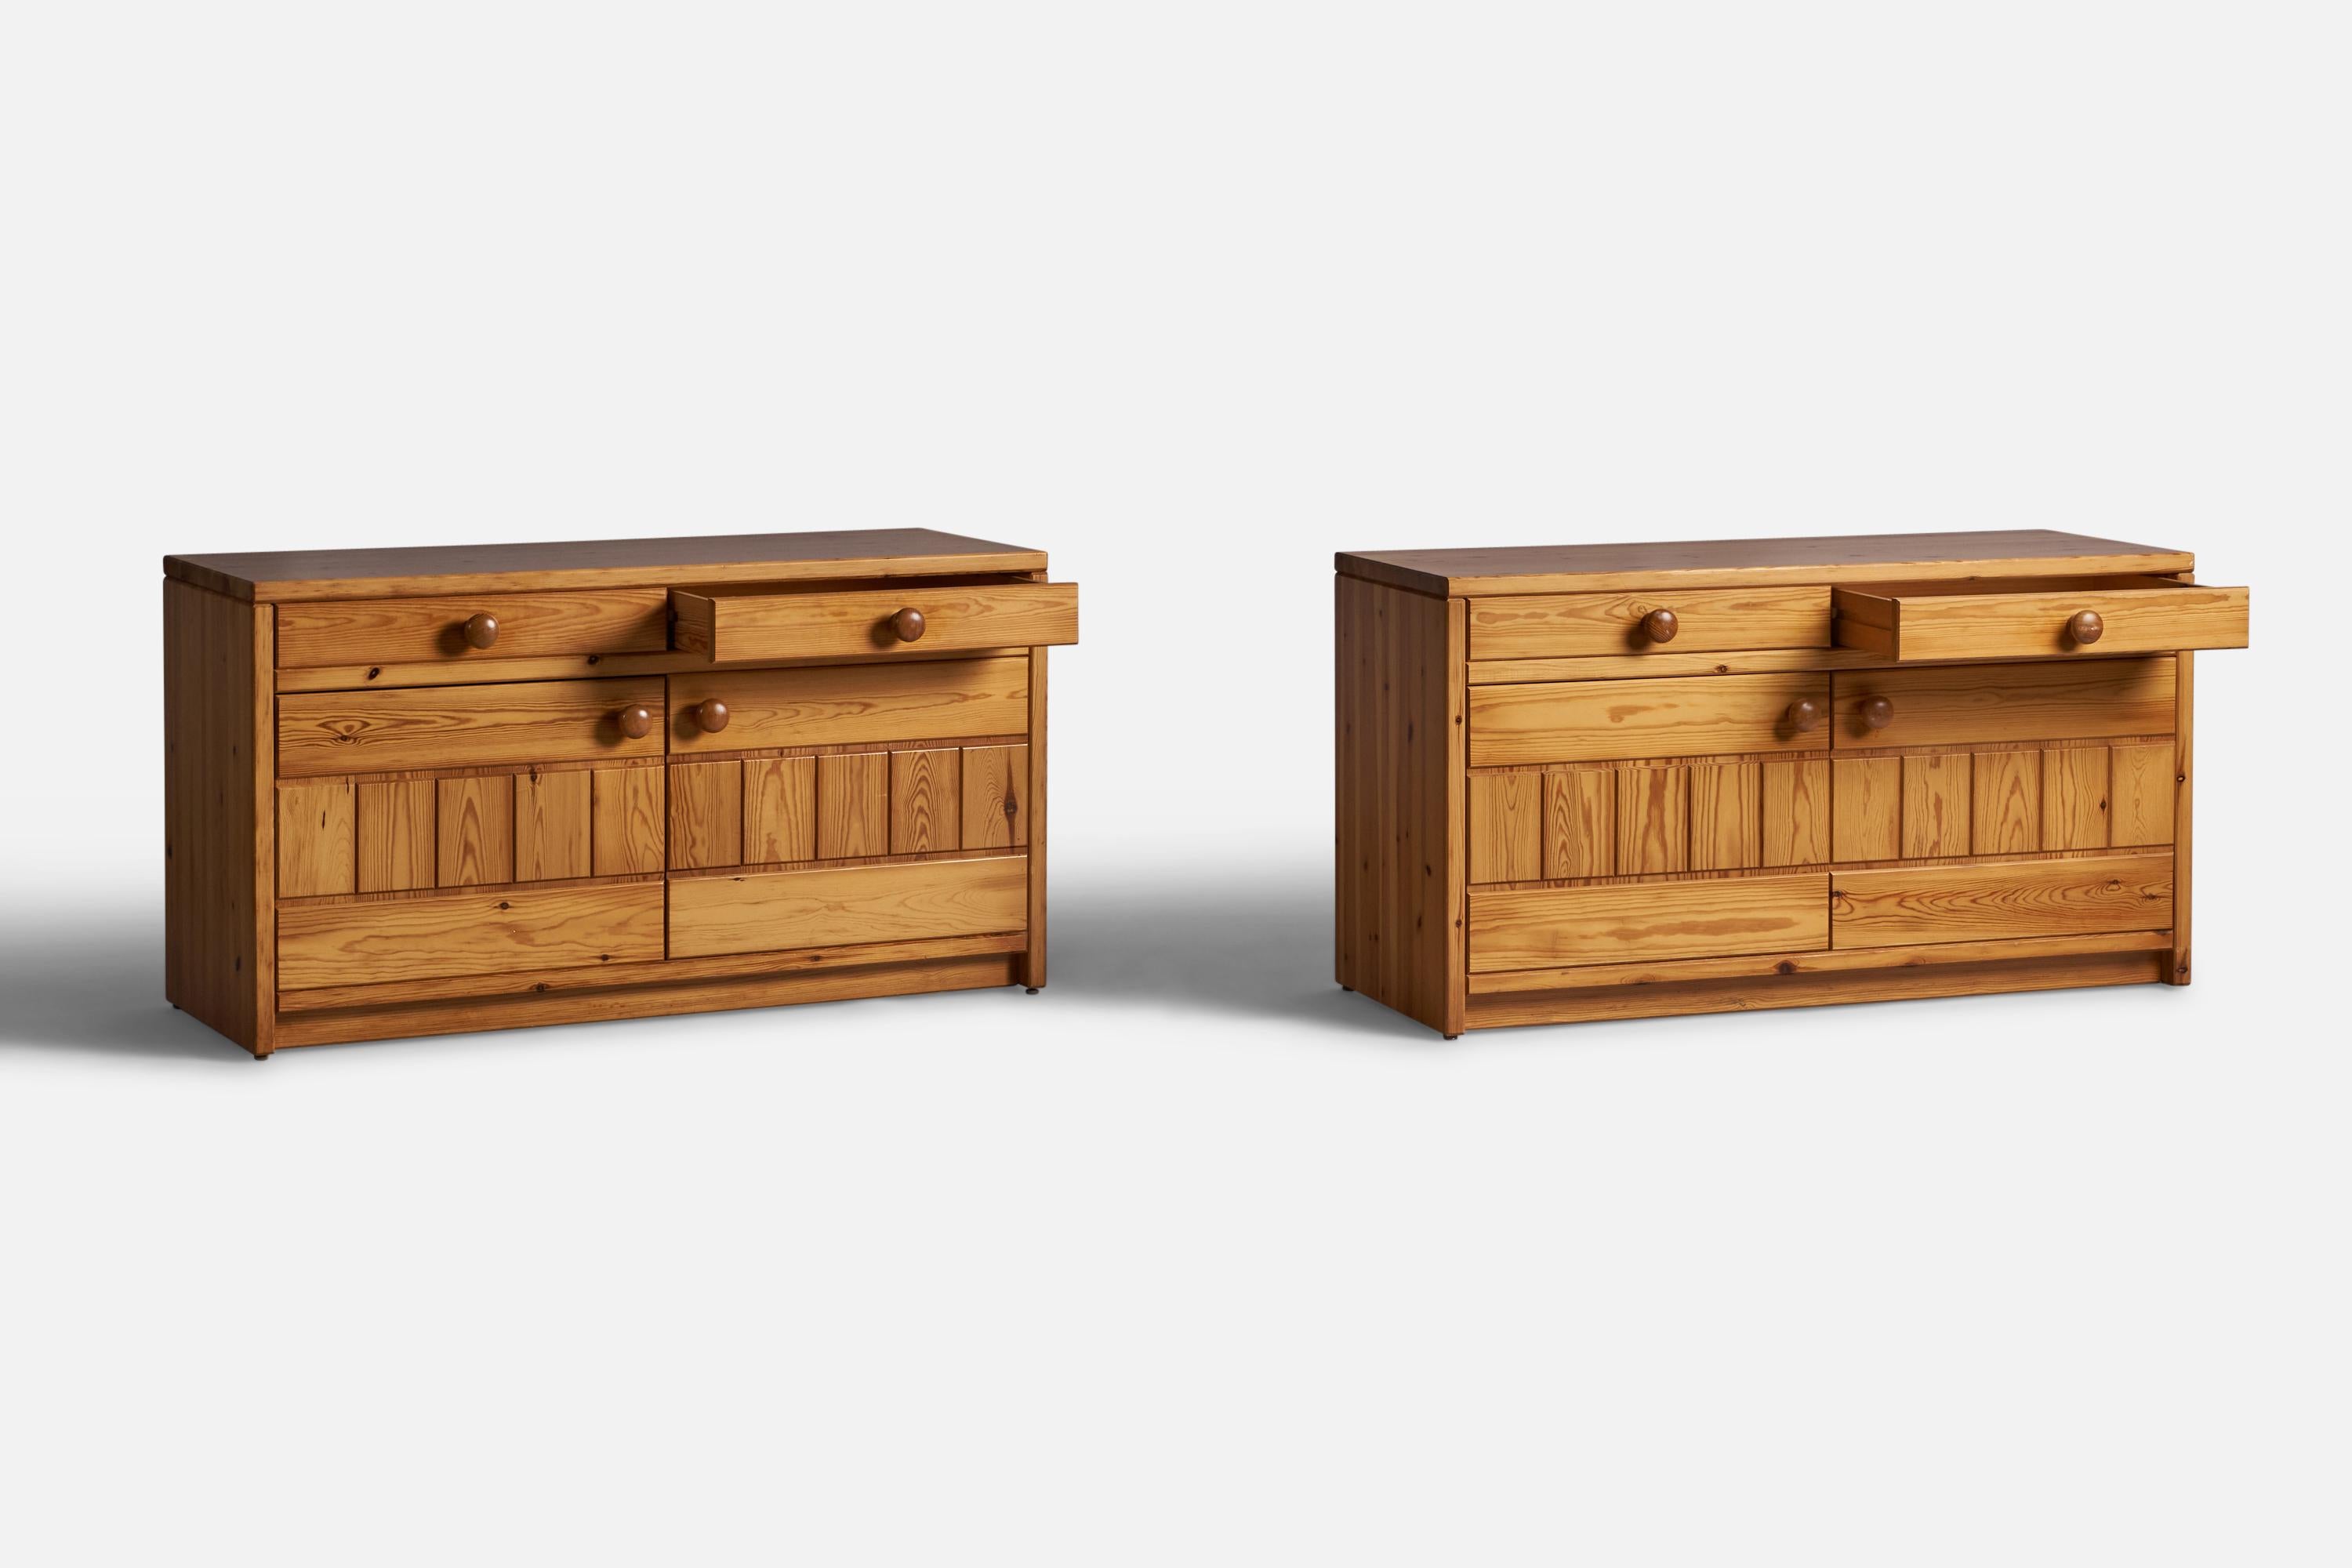 A pair of pine cabinets, designed and produced in Denmark, c. 1970s.